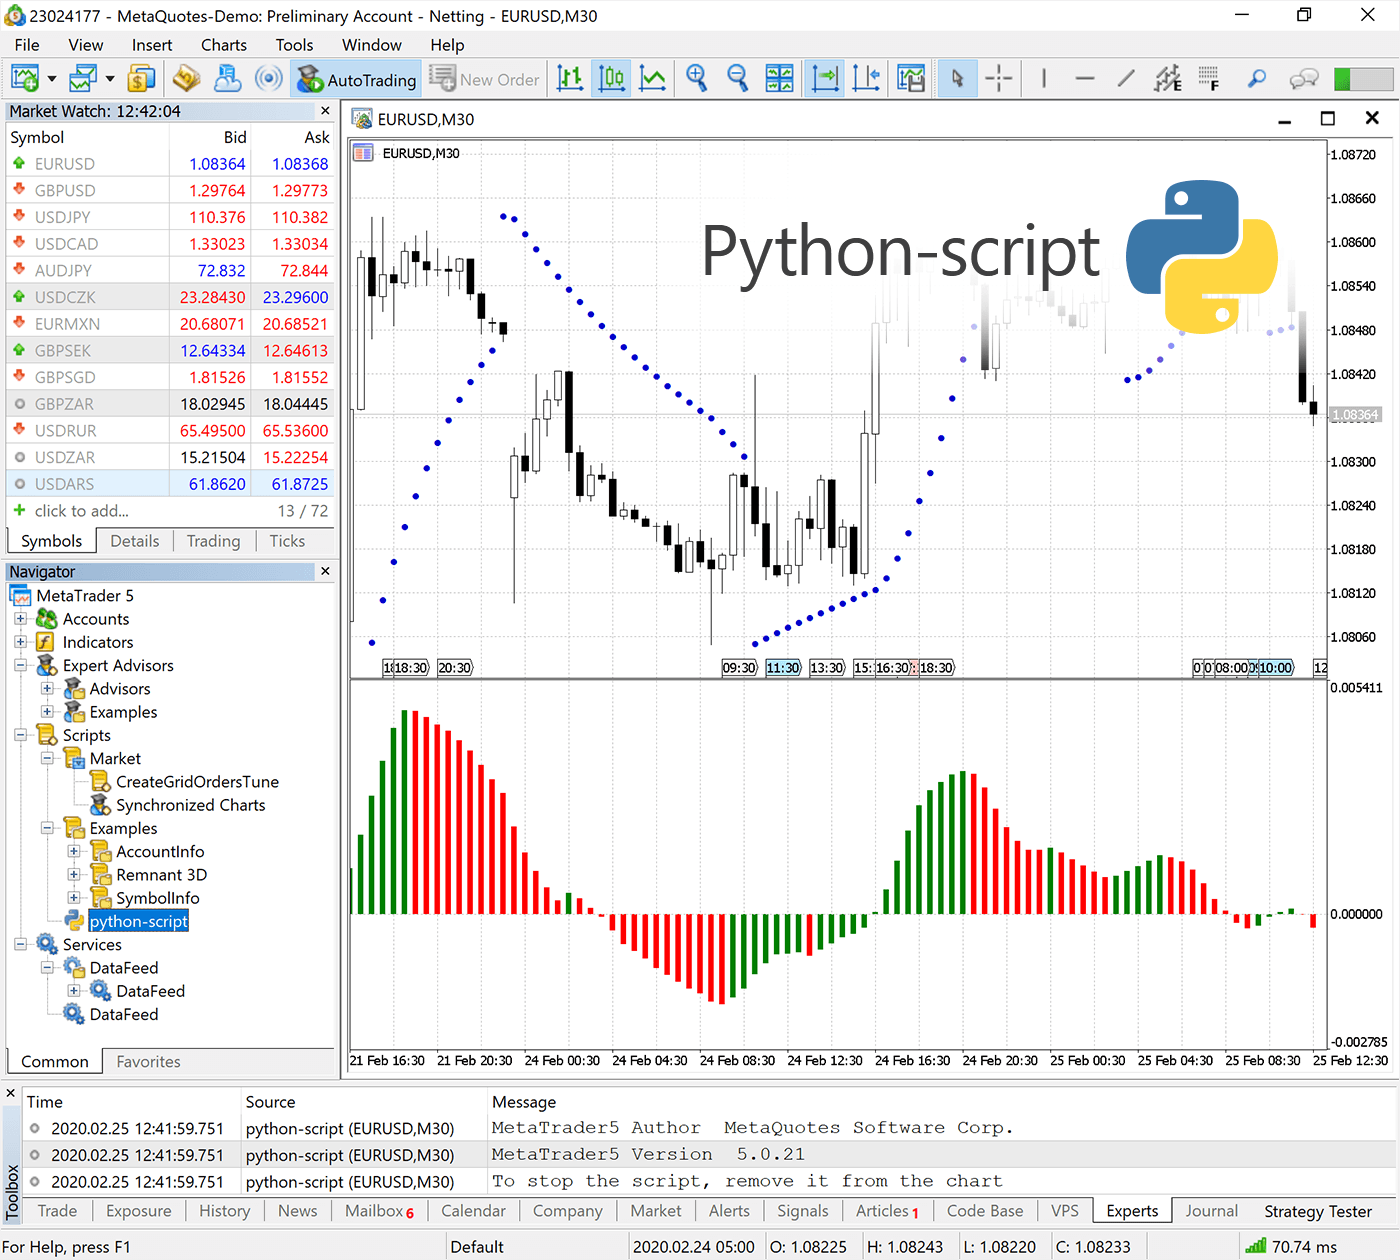 MetaTrader 5 build 2340 simplifies working with SQLite and Python